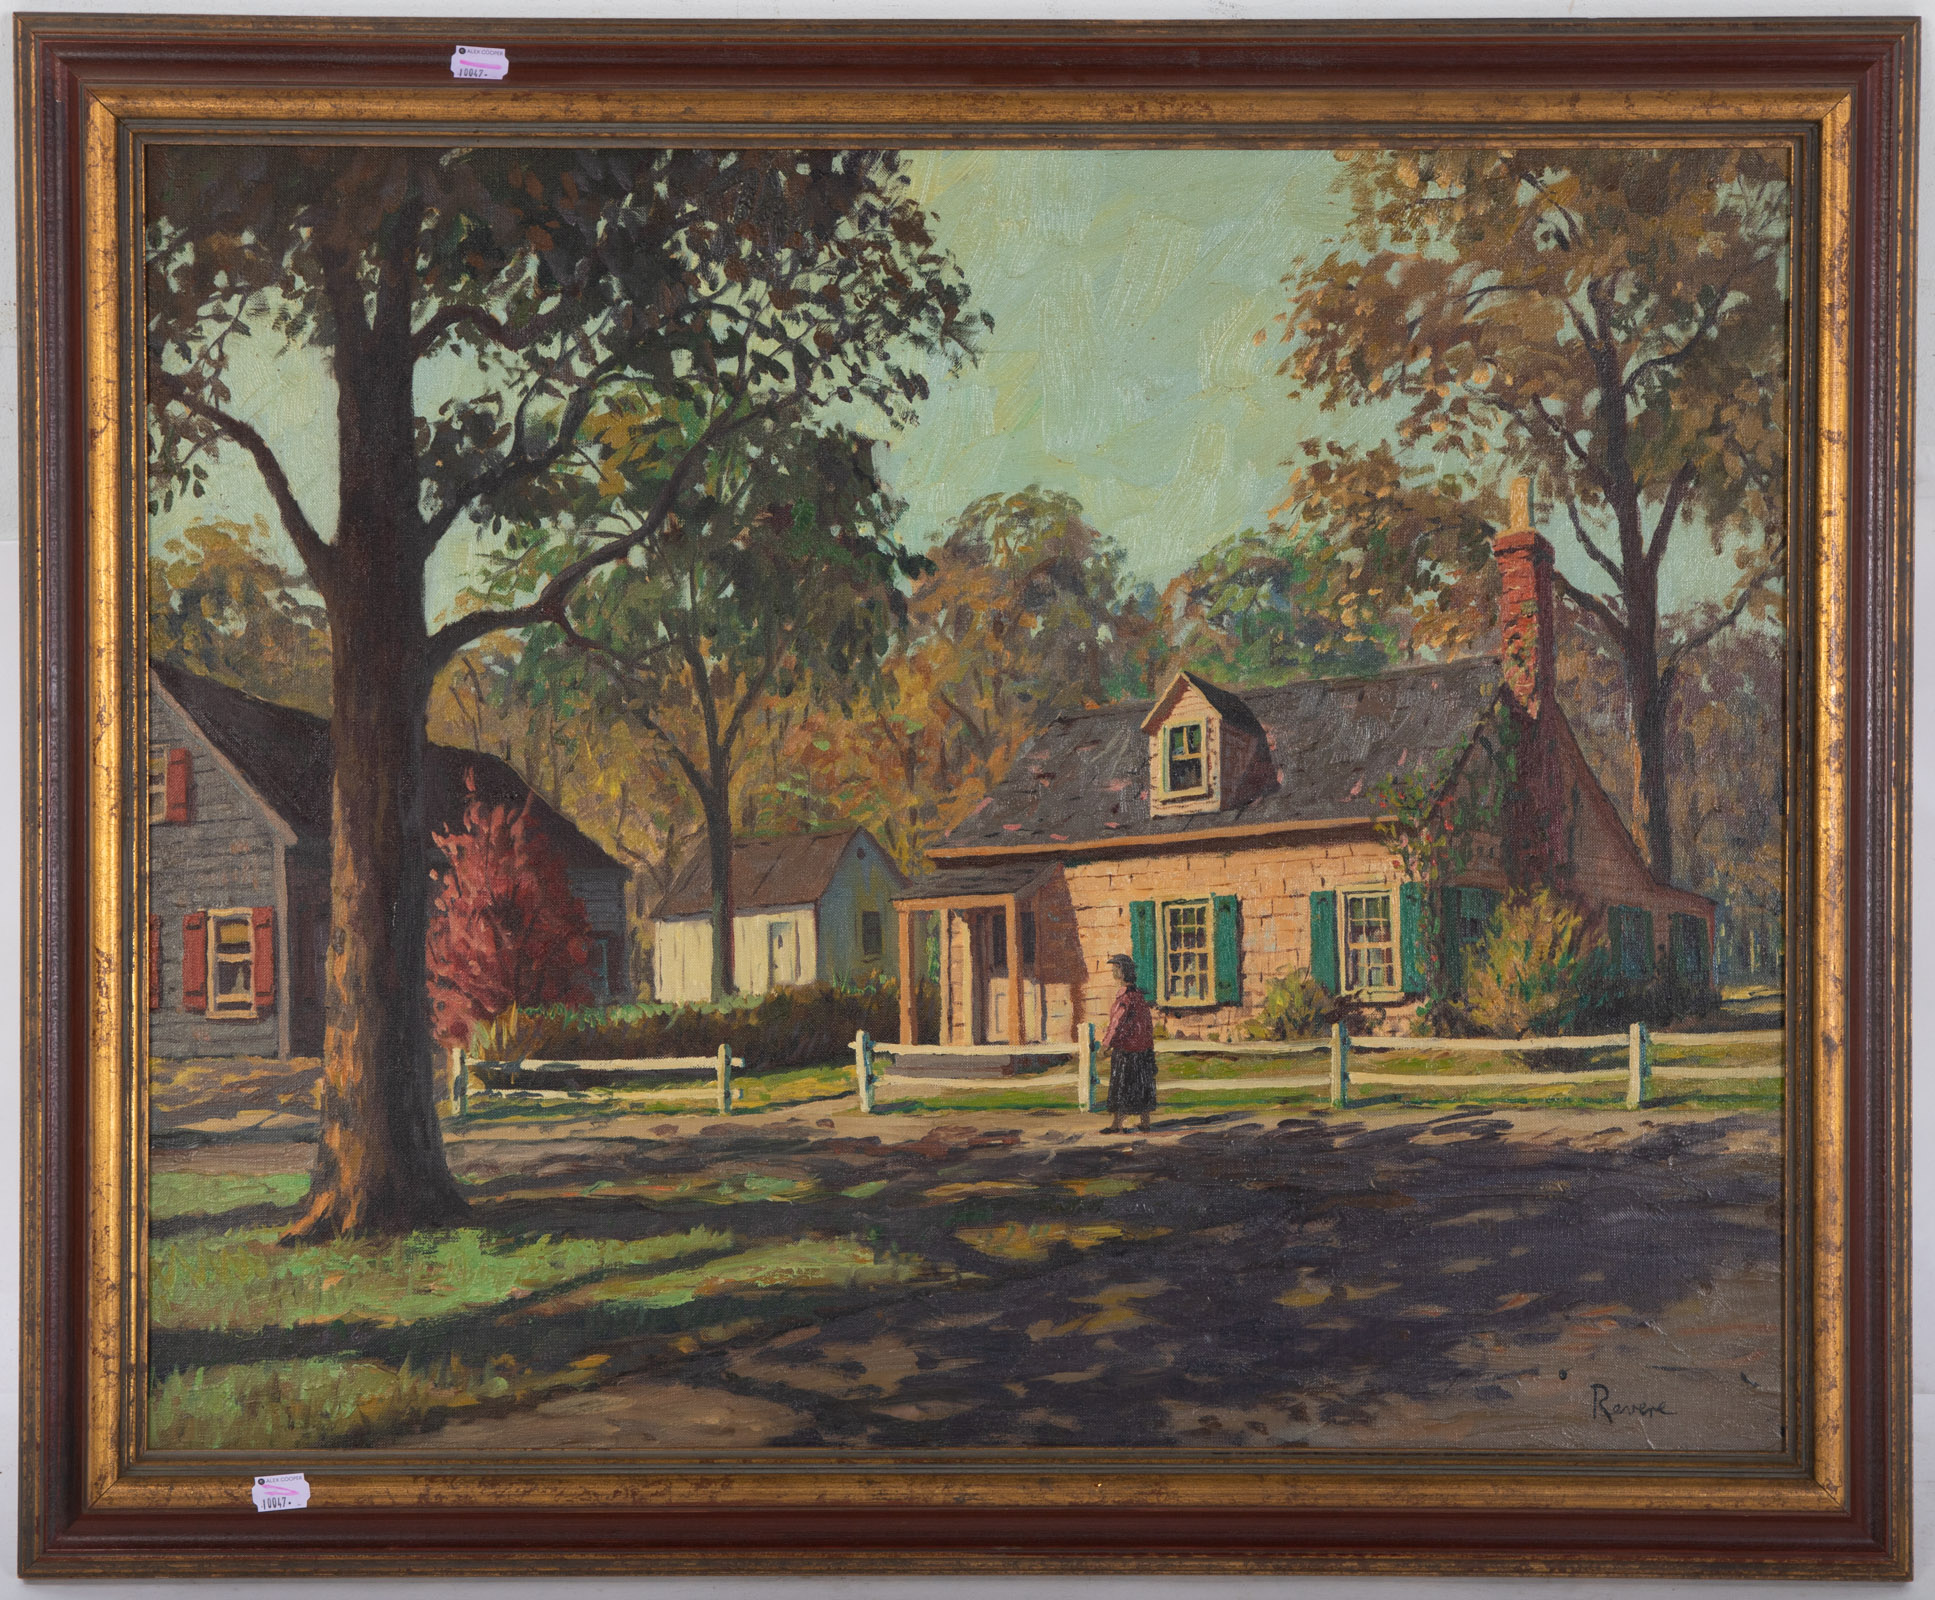 REVERE. "COTTAGE HOME IN RURAL